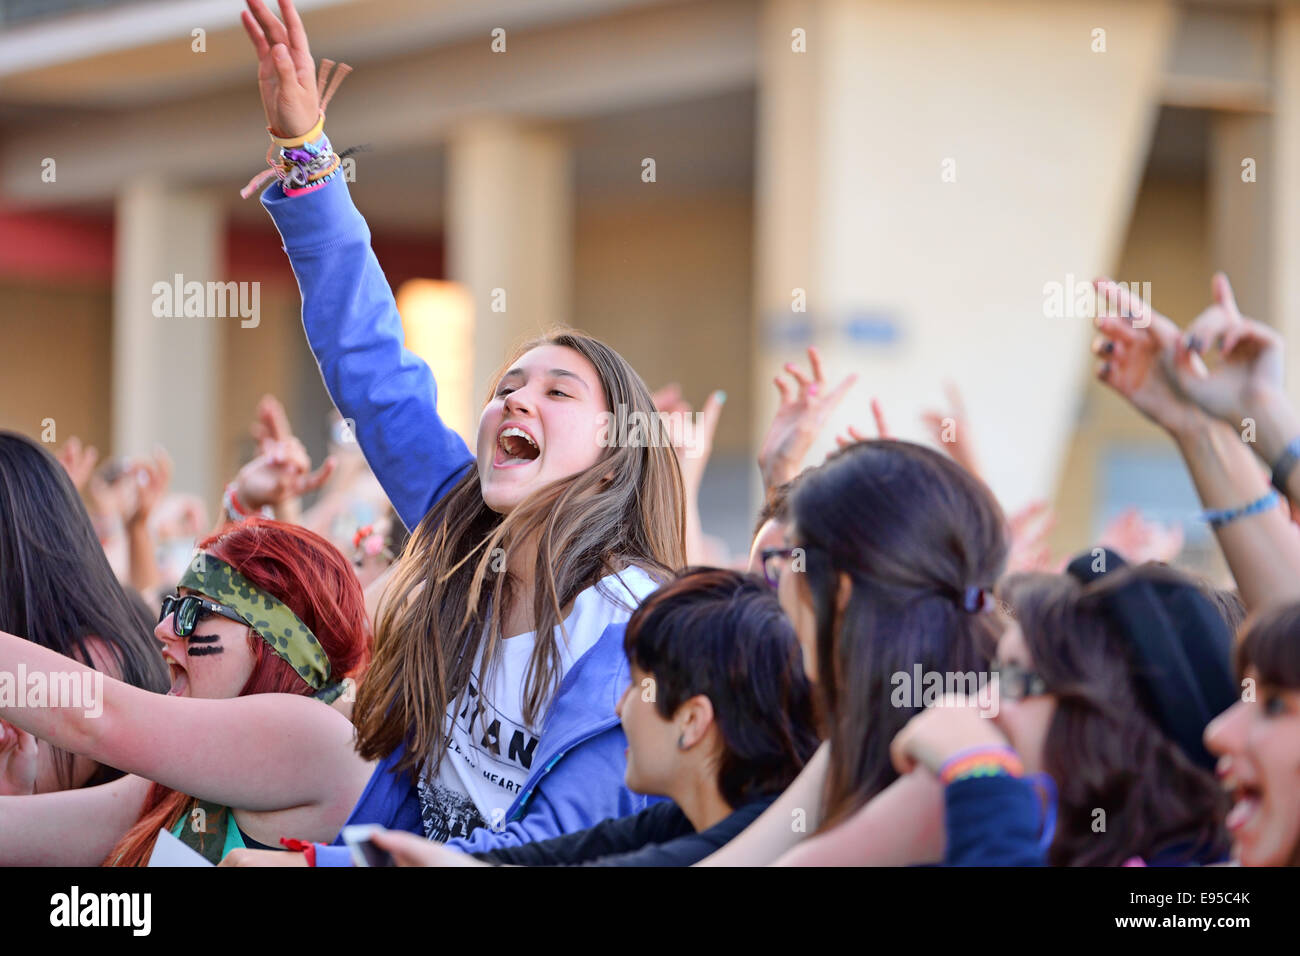 BARCELONA - MAY 23: Girls from the audience in front of the stage, cheering on their idols at the Primavera Pop Festival of Bada Stock Photo